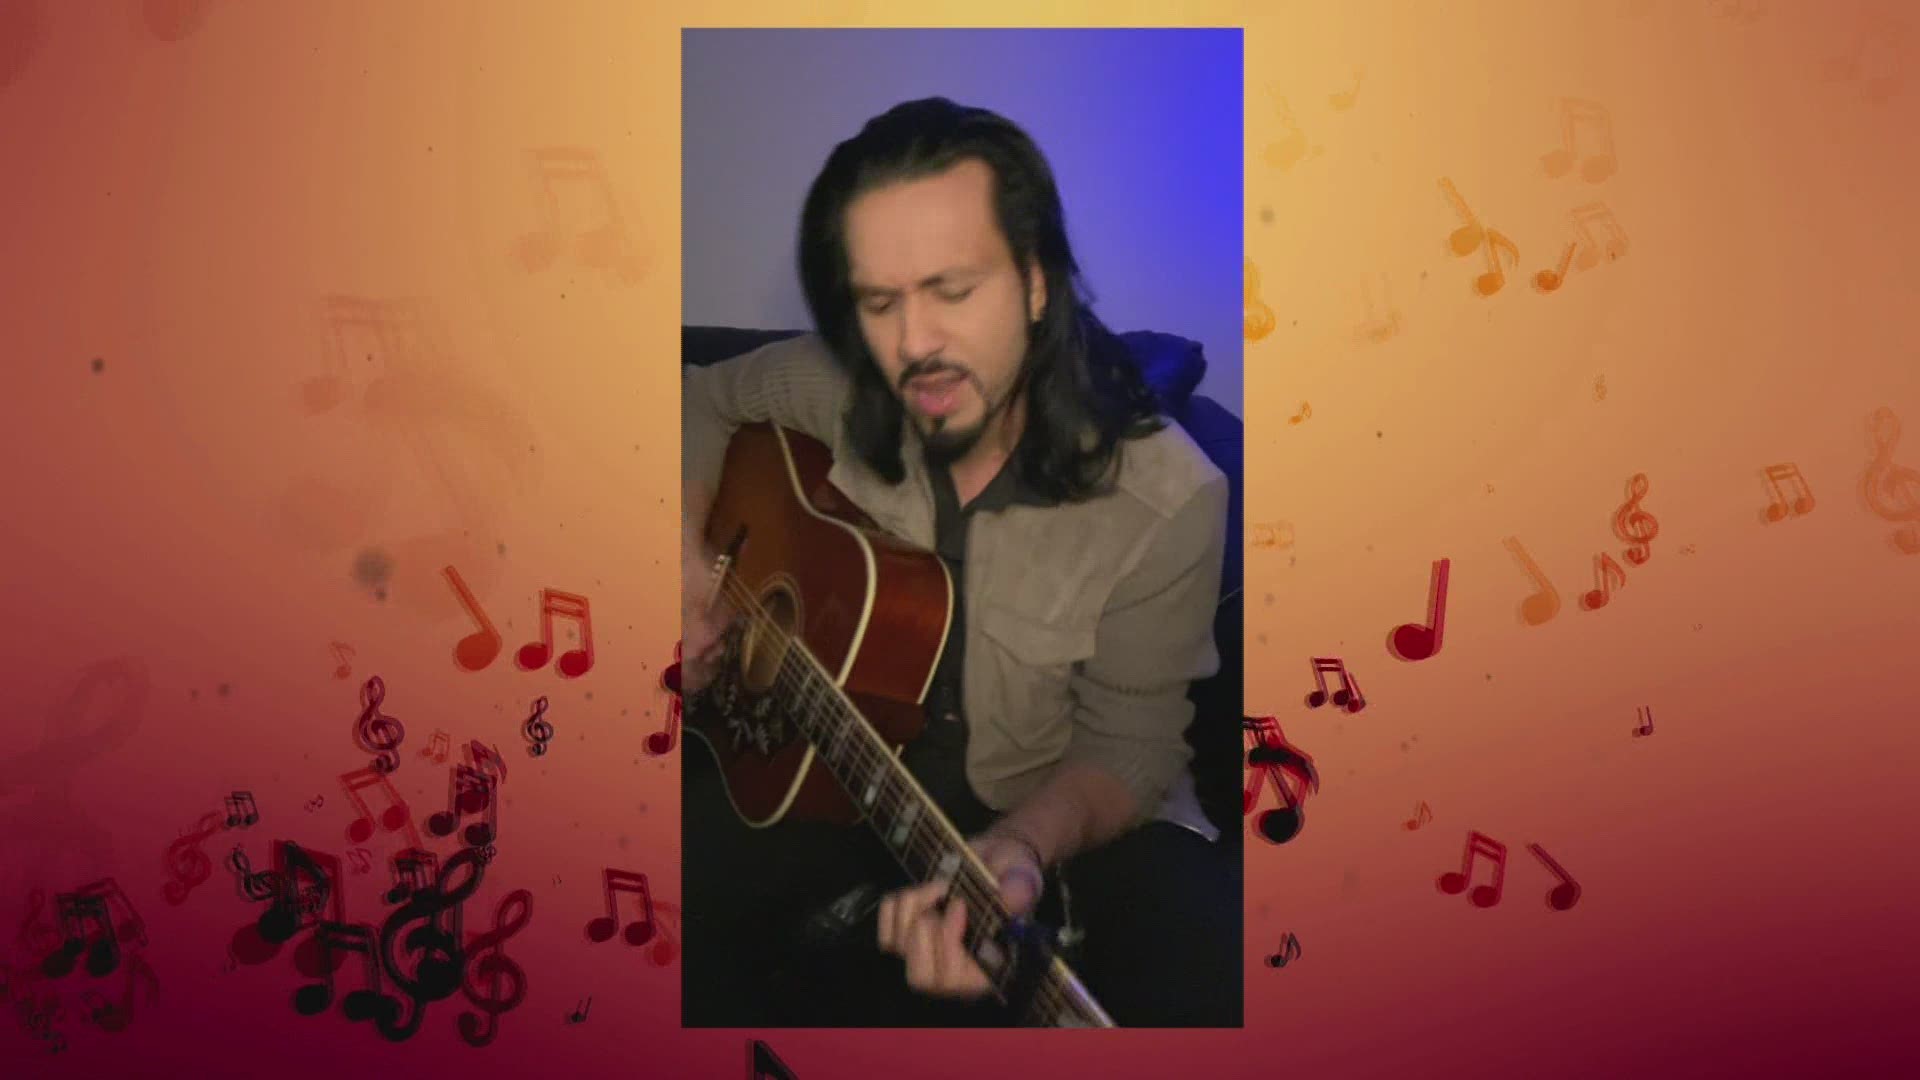 Leigh Kakaty from the band Pop Evil shares an acoustic rendition of "100 in a 55."